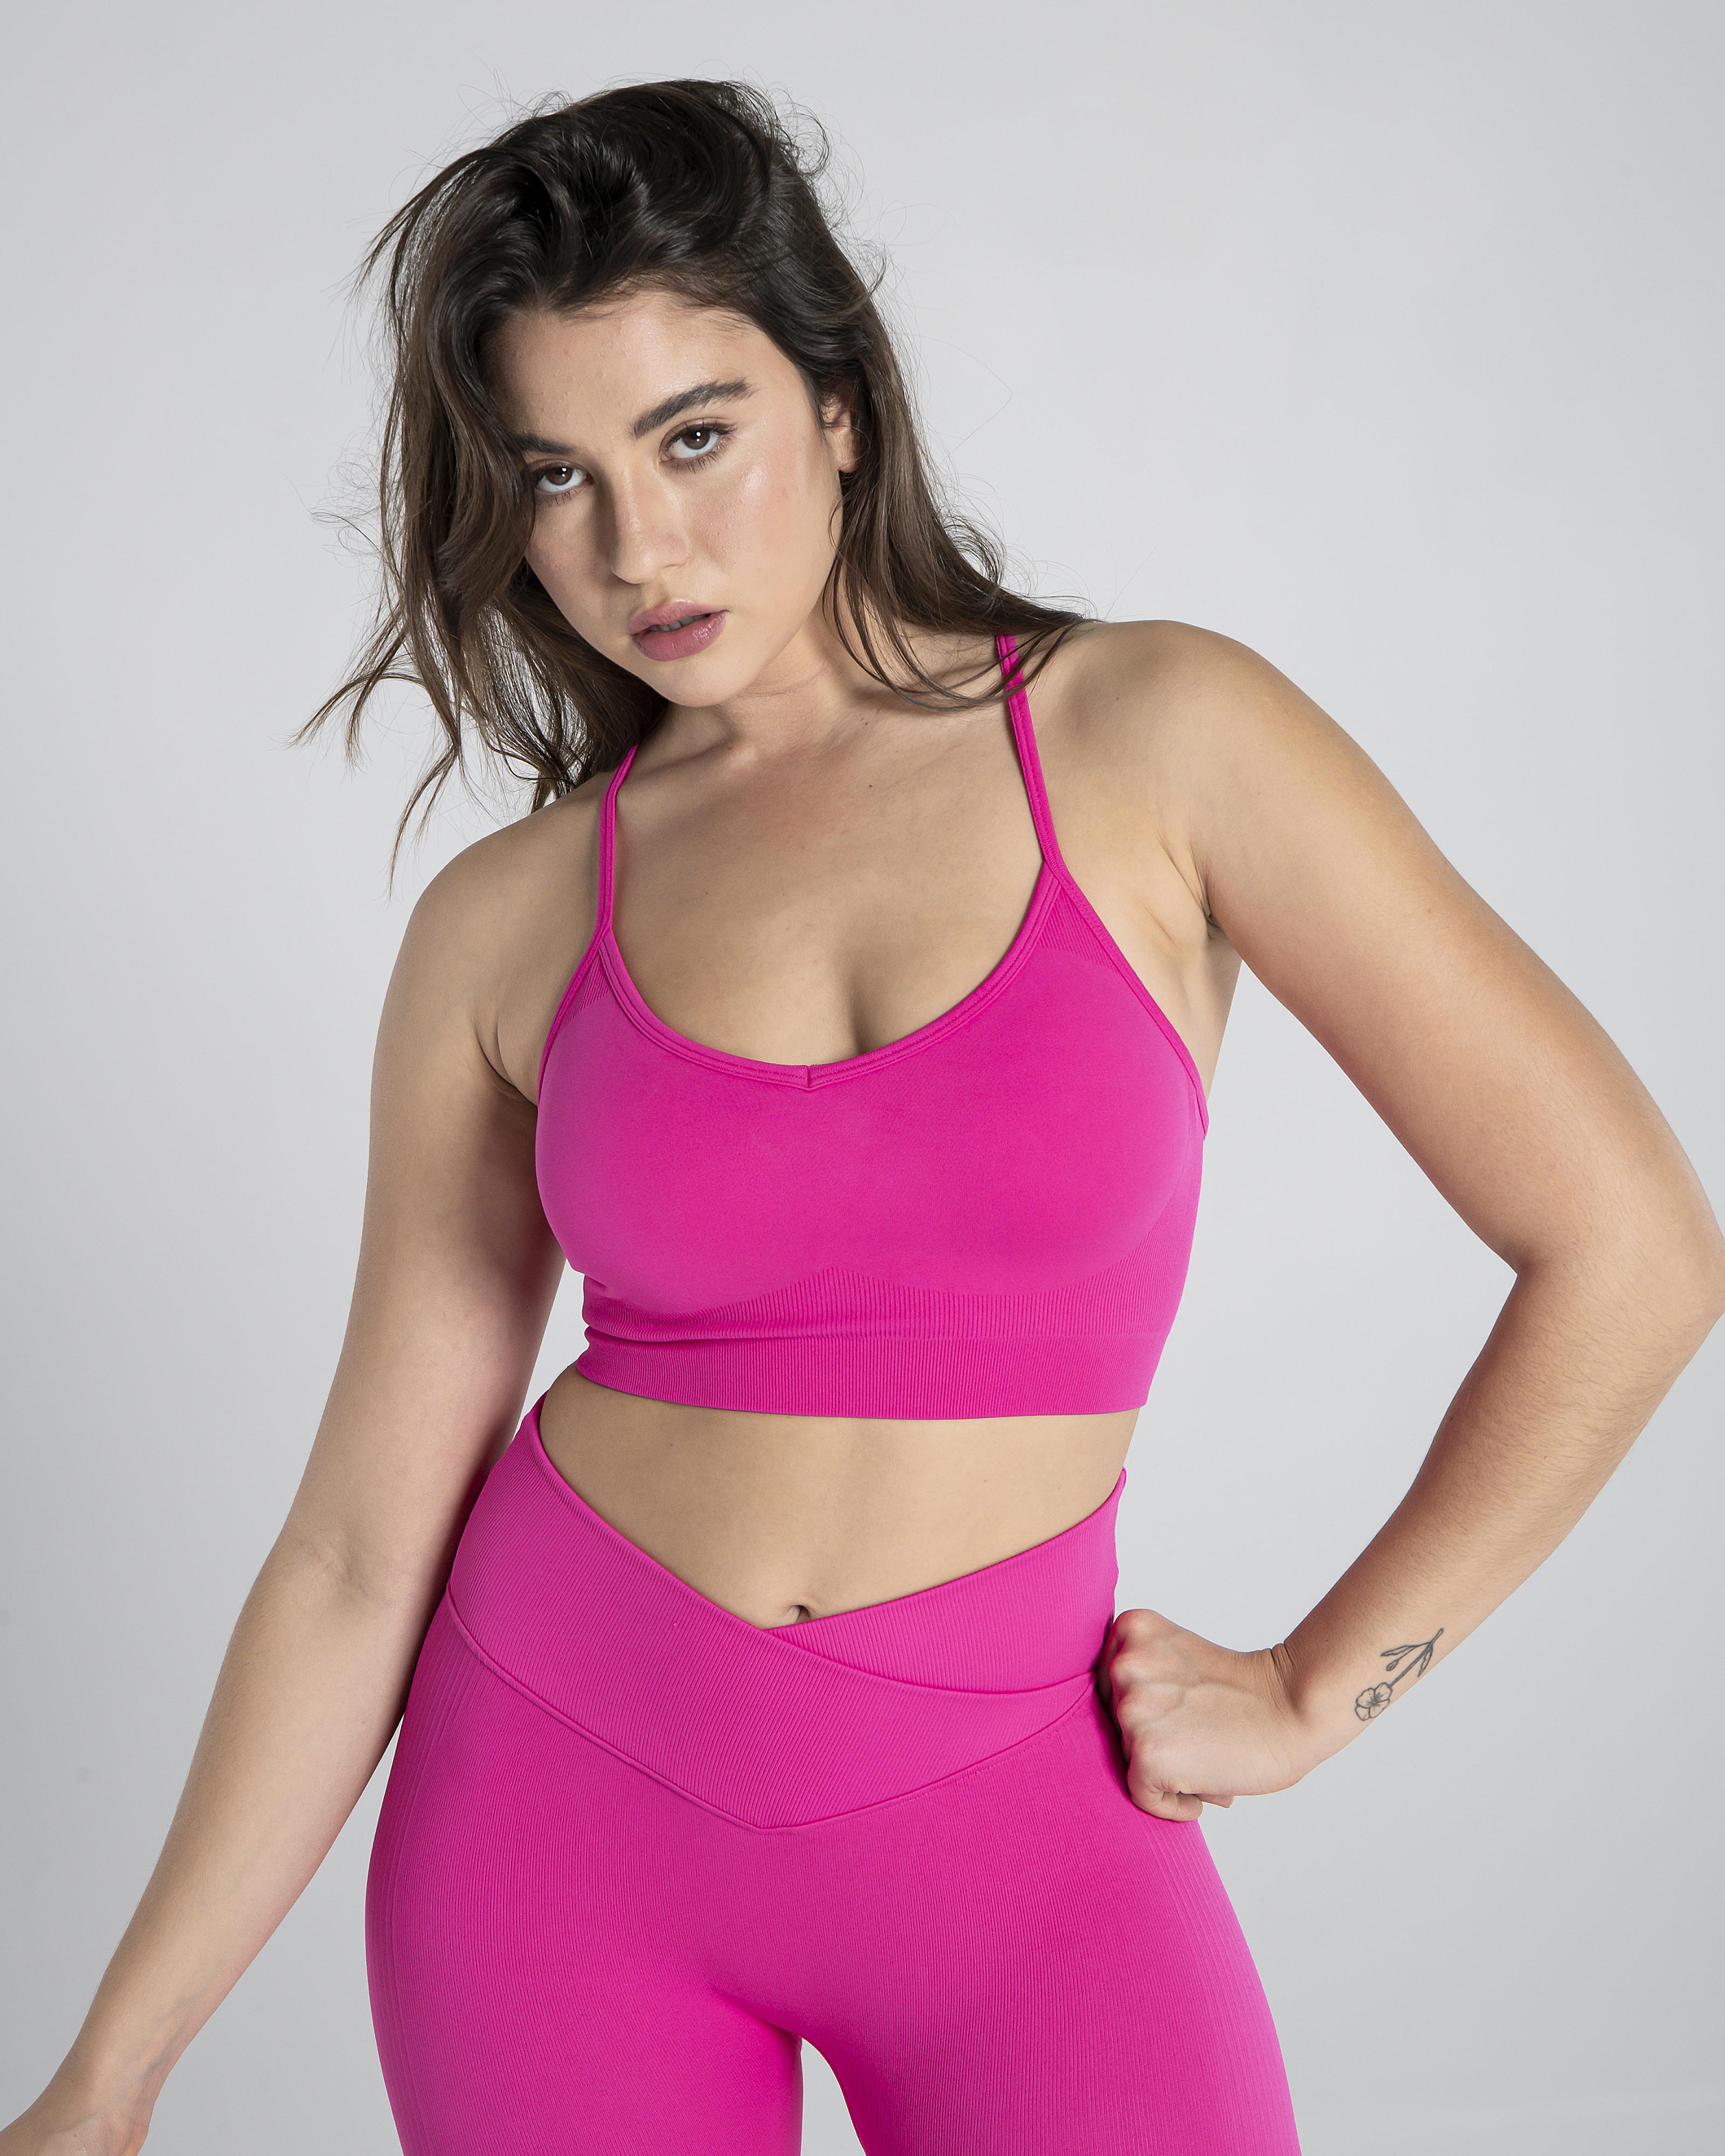 Cosmolle's Most Popular Activewear Are Comfortable for All-Day Wear - A  Chata de Batom